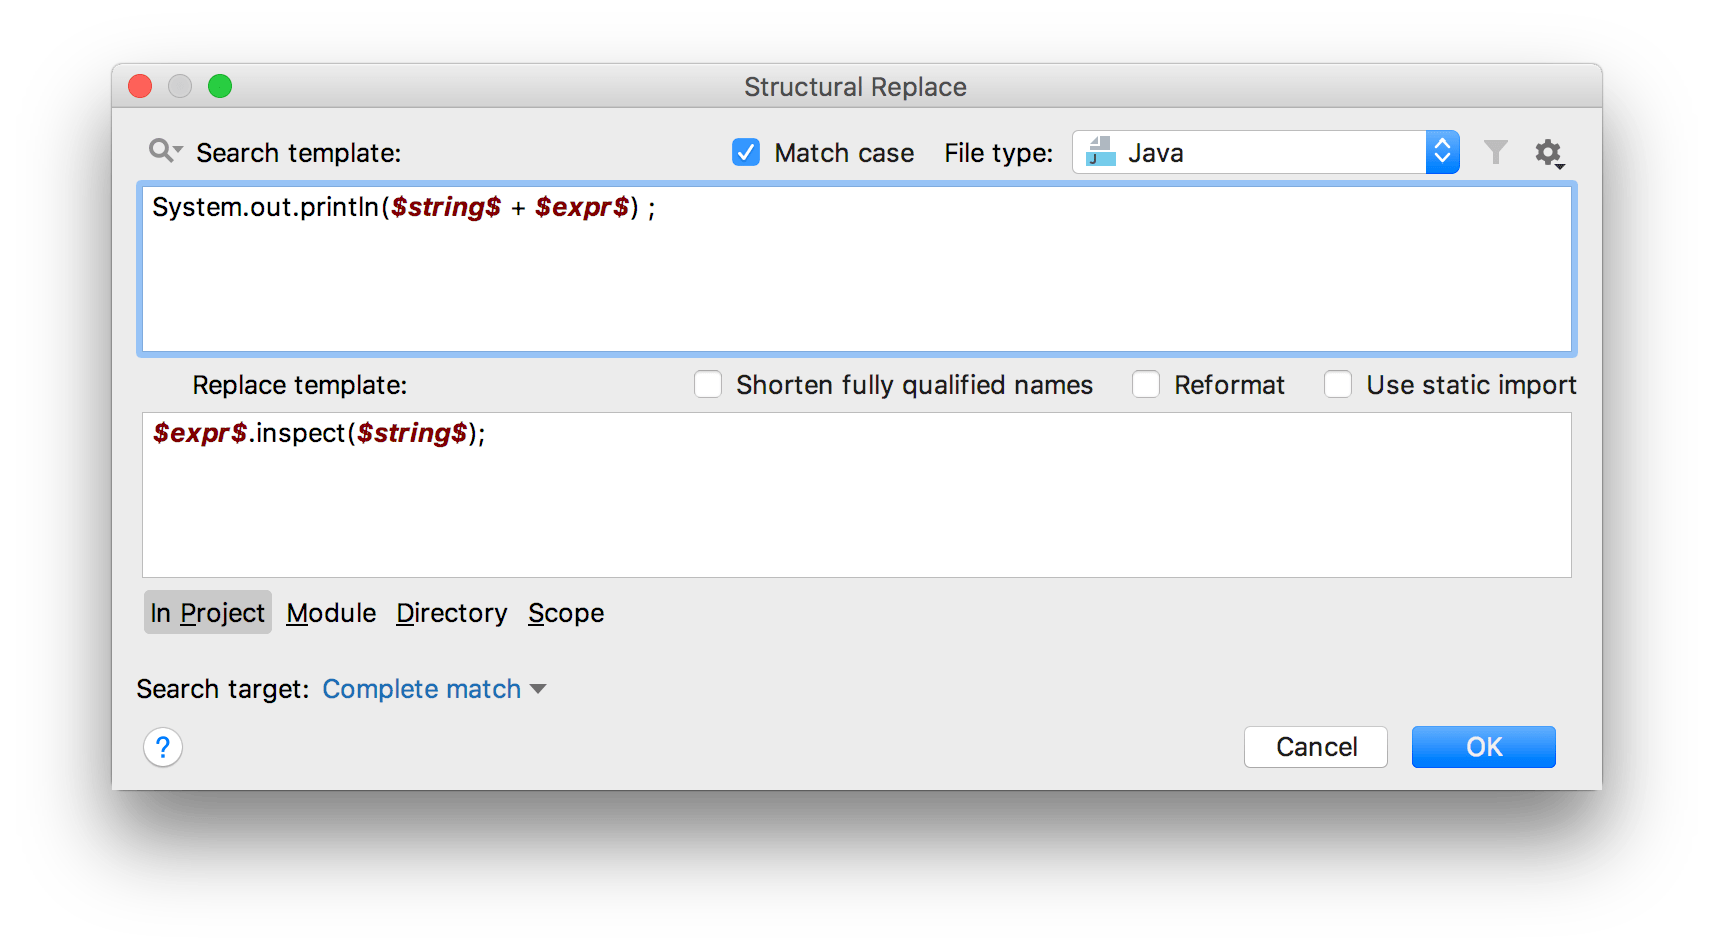 The Structural Replace dialog